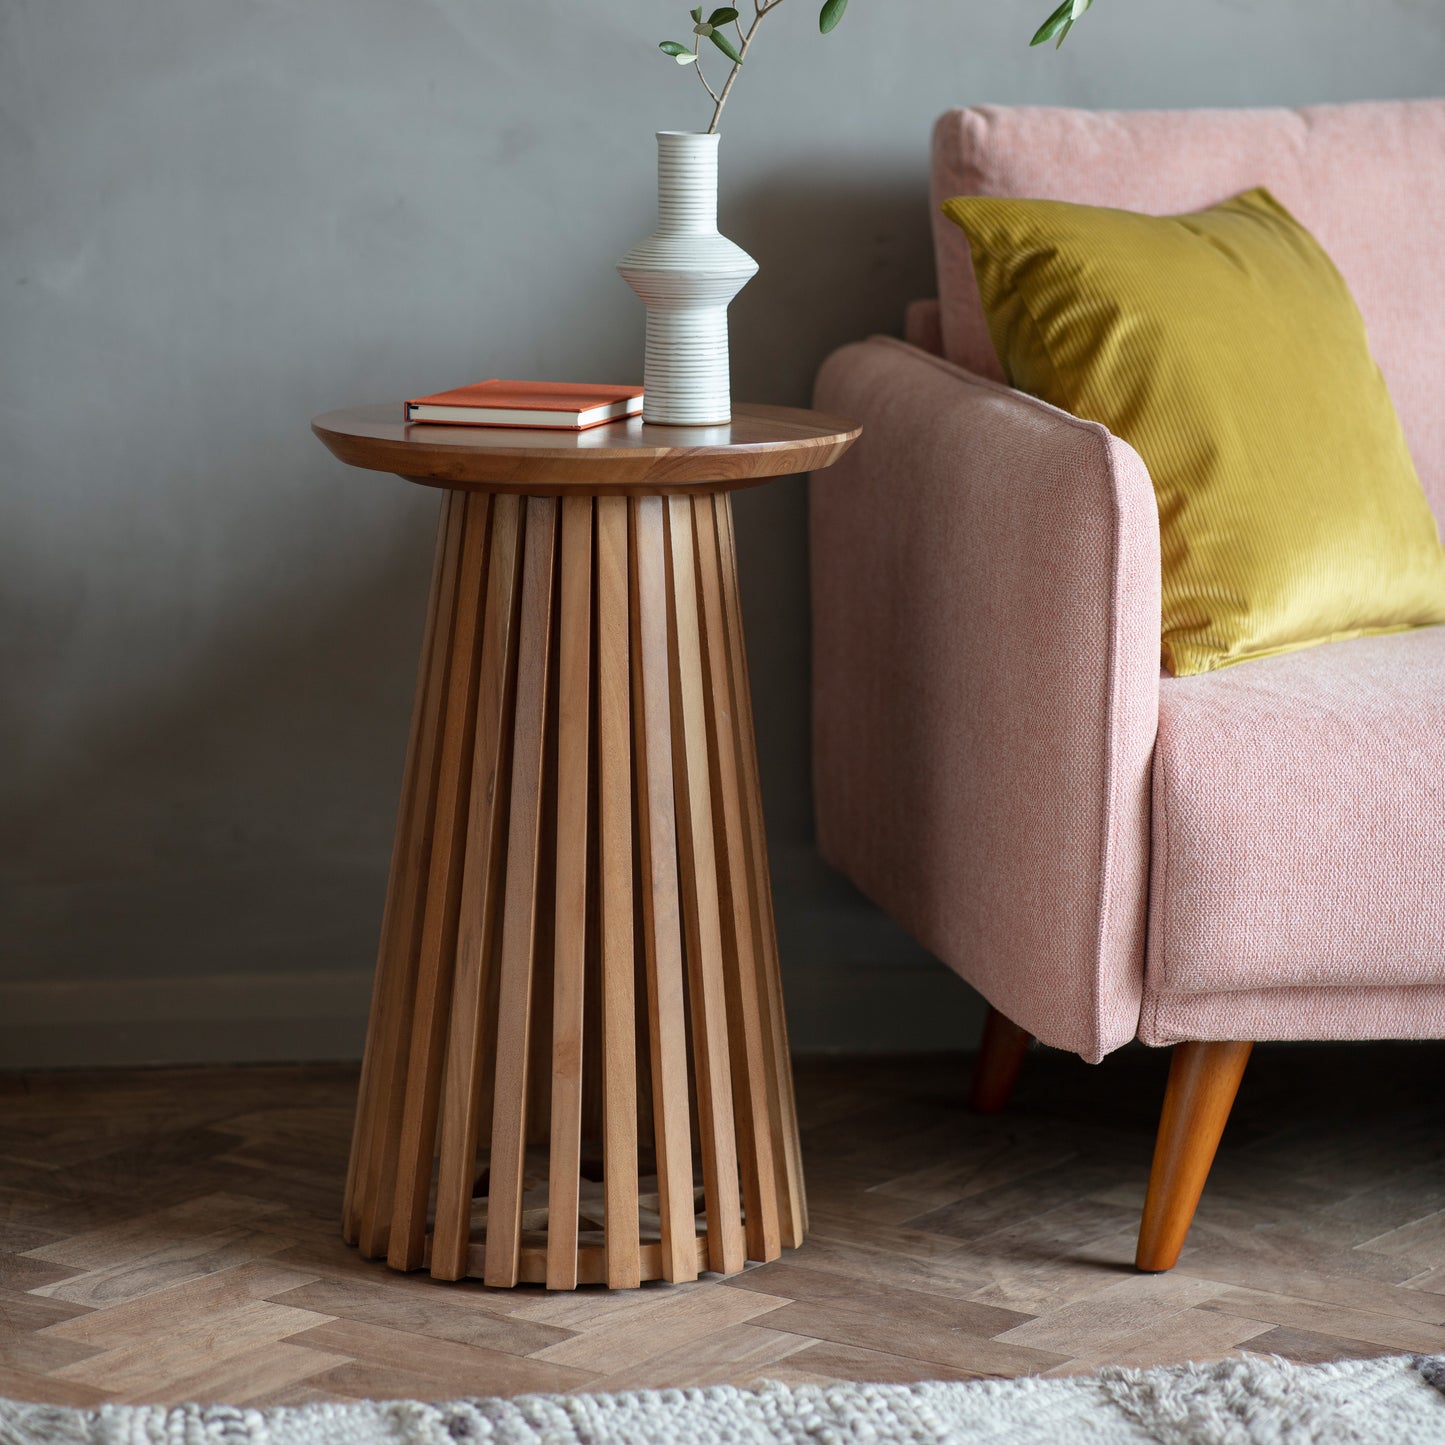 A Ditsum slatted side table 400x400x600mm by Kikiathome.co.uk as home furniture in a living room with a pink couch.